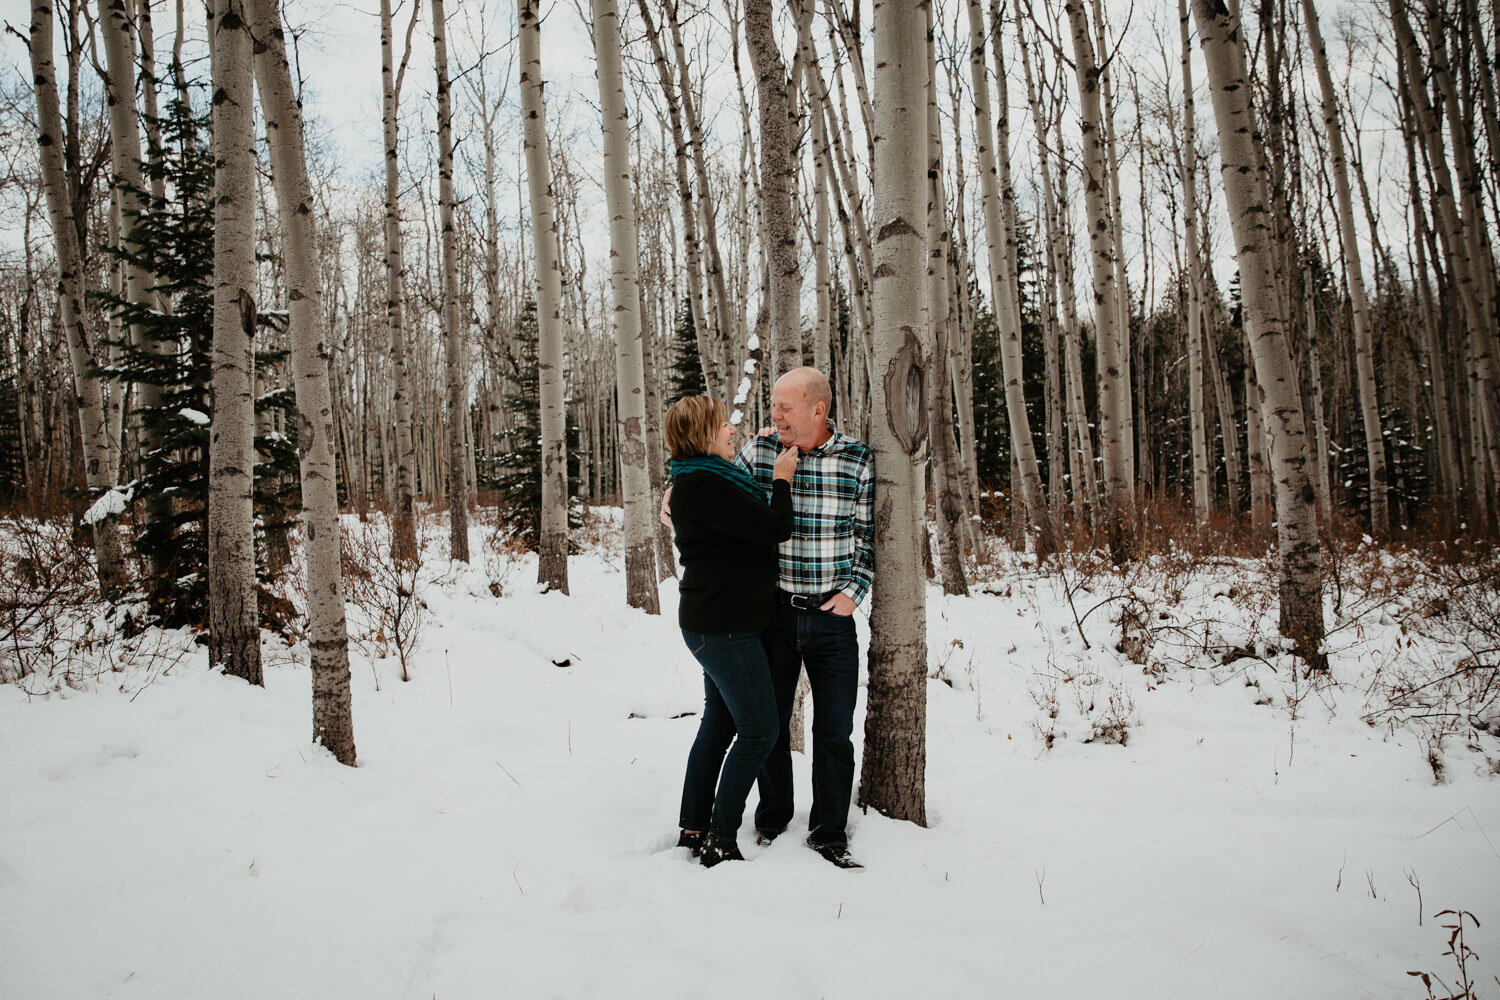 Couple in aspen tress | Jamie Robson Photography | Engagement Photographer in Jasper (Copy)